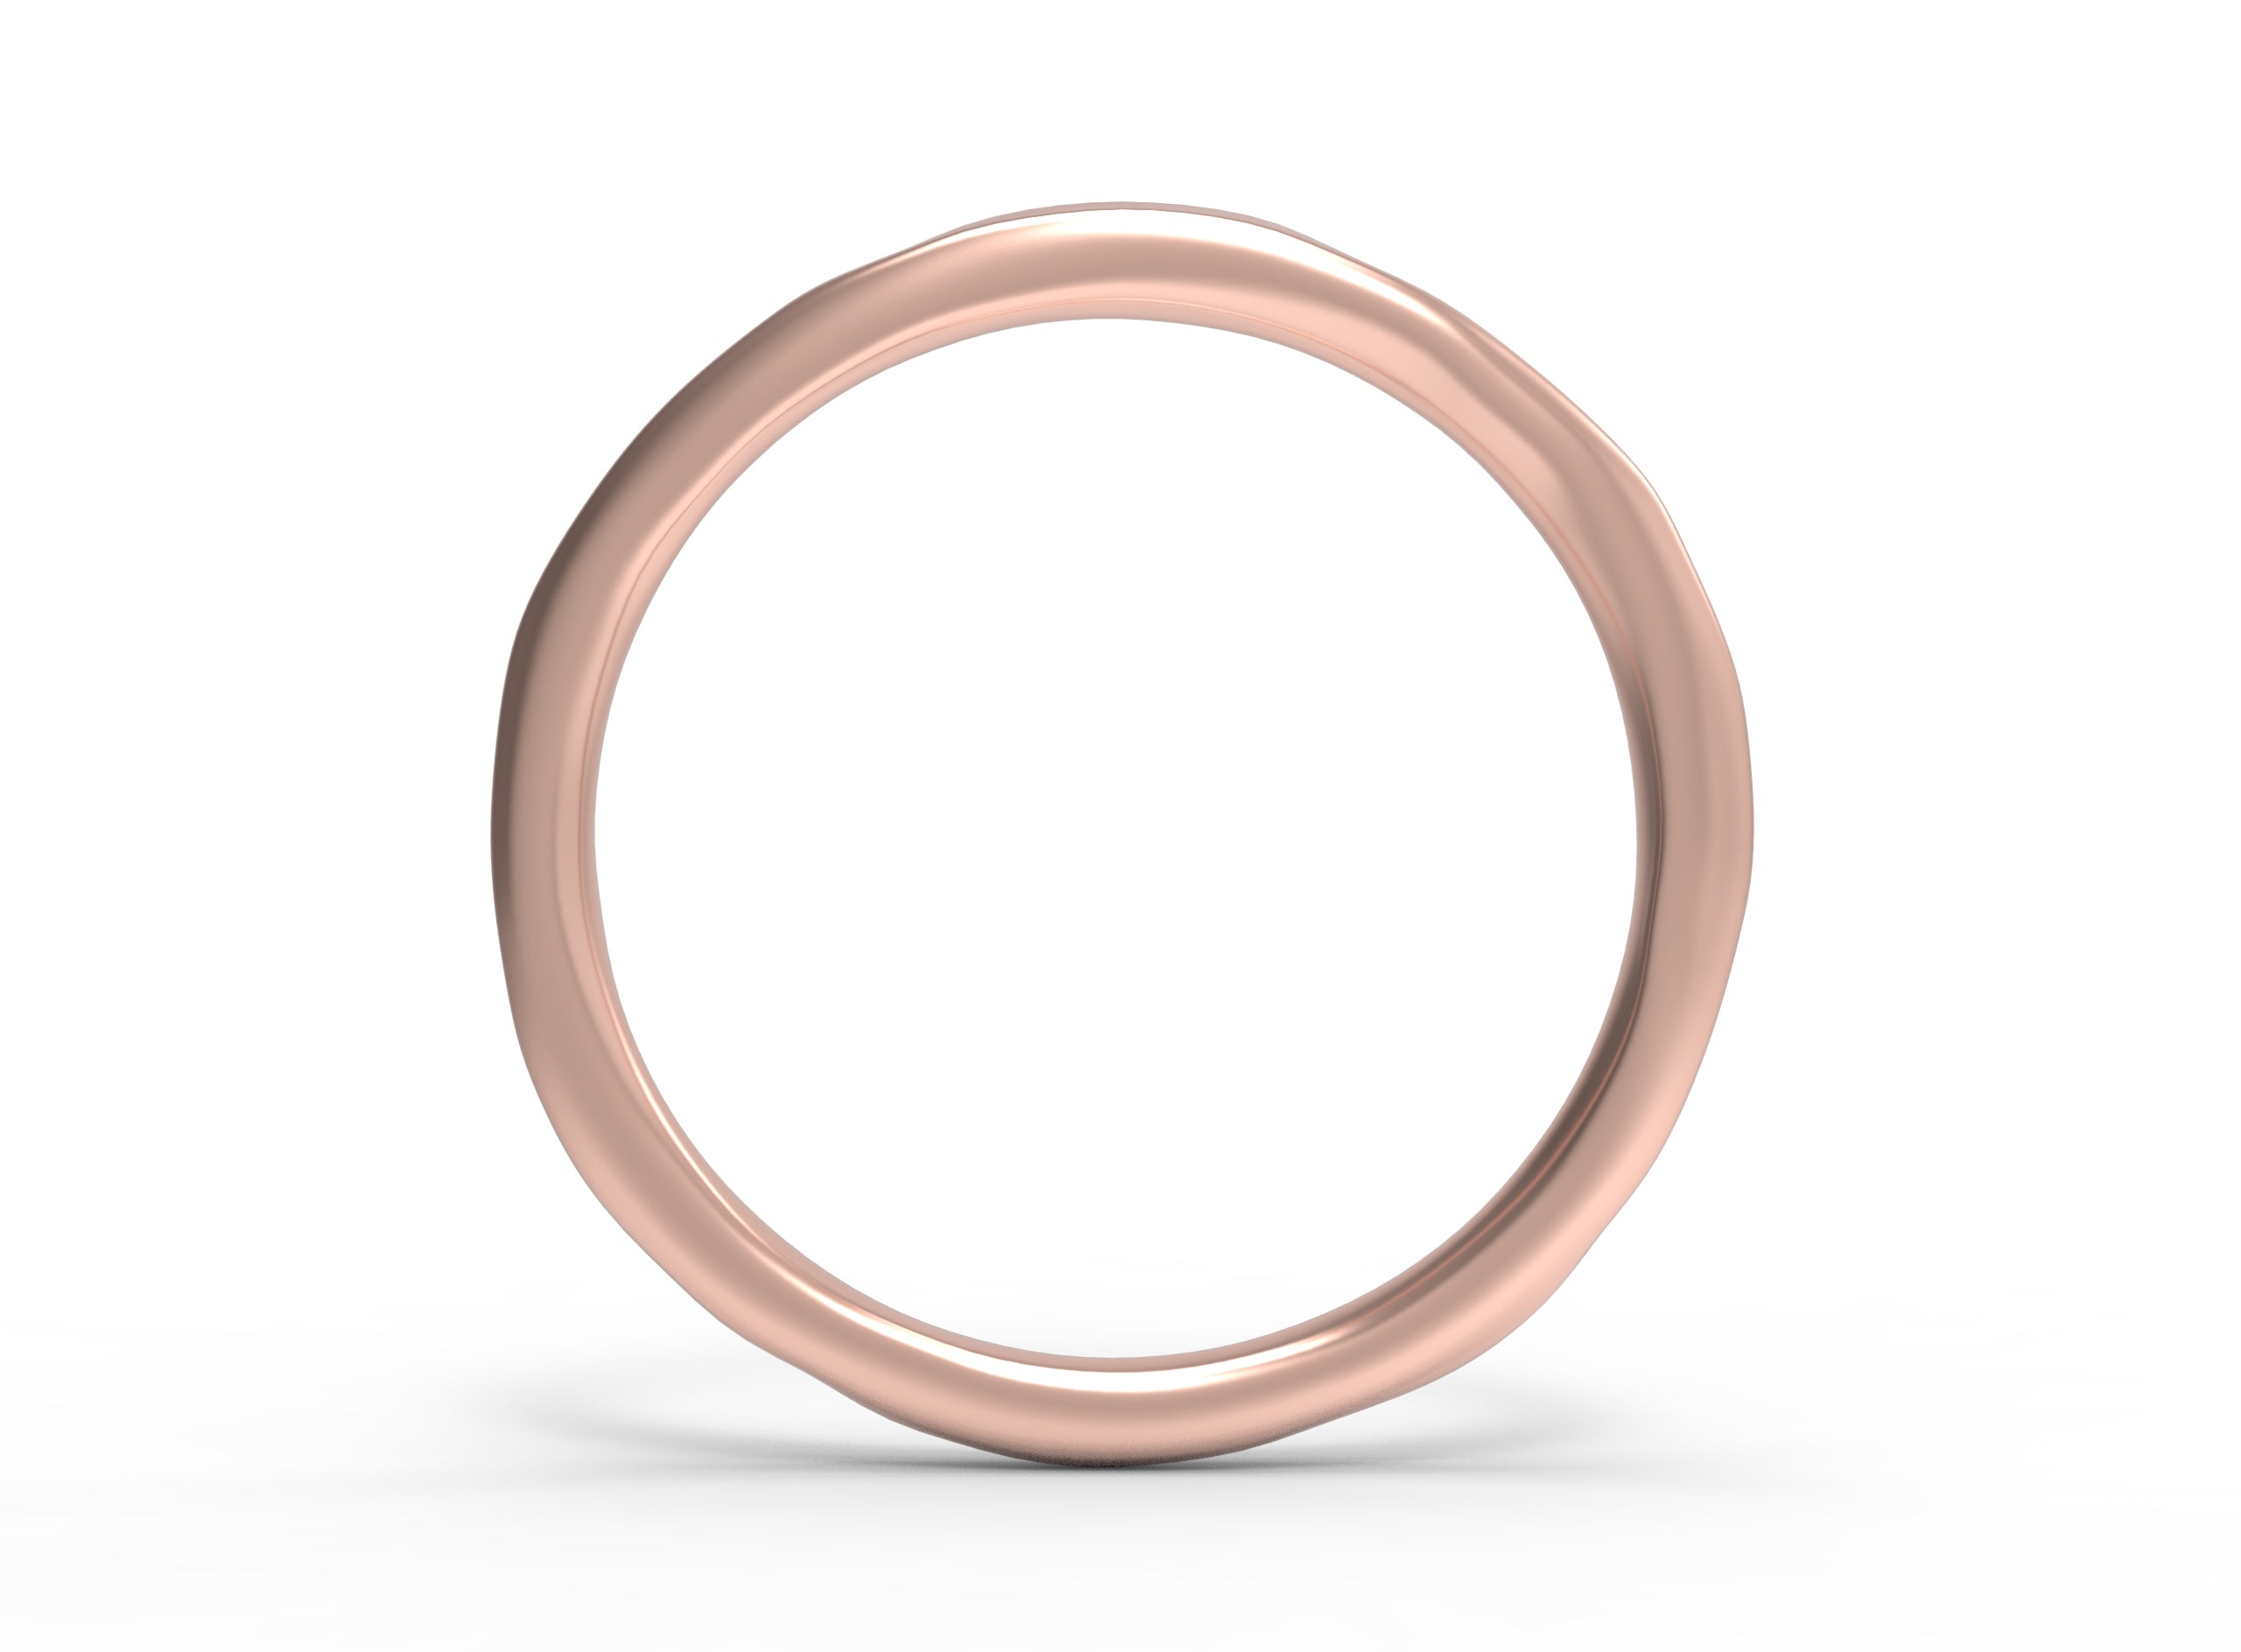 Close up of the Vines womens wedding band by Fluid Jewellery in rose gold 3